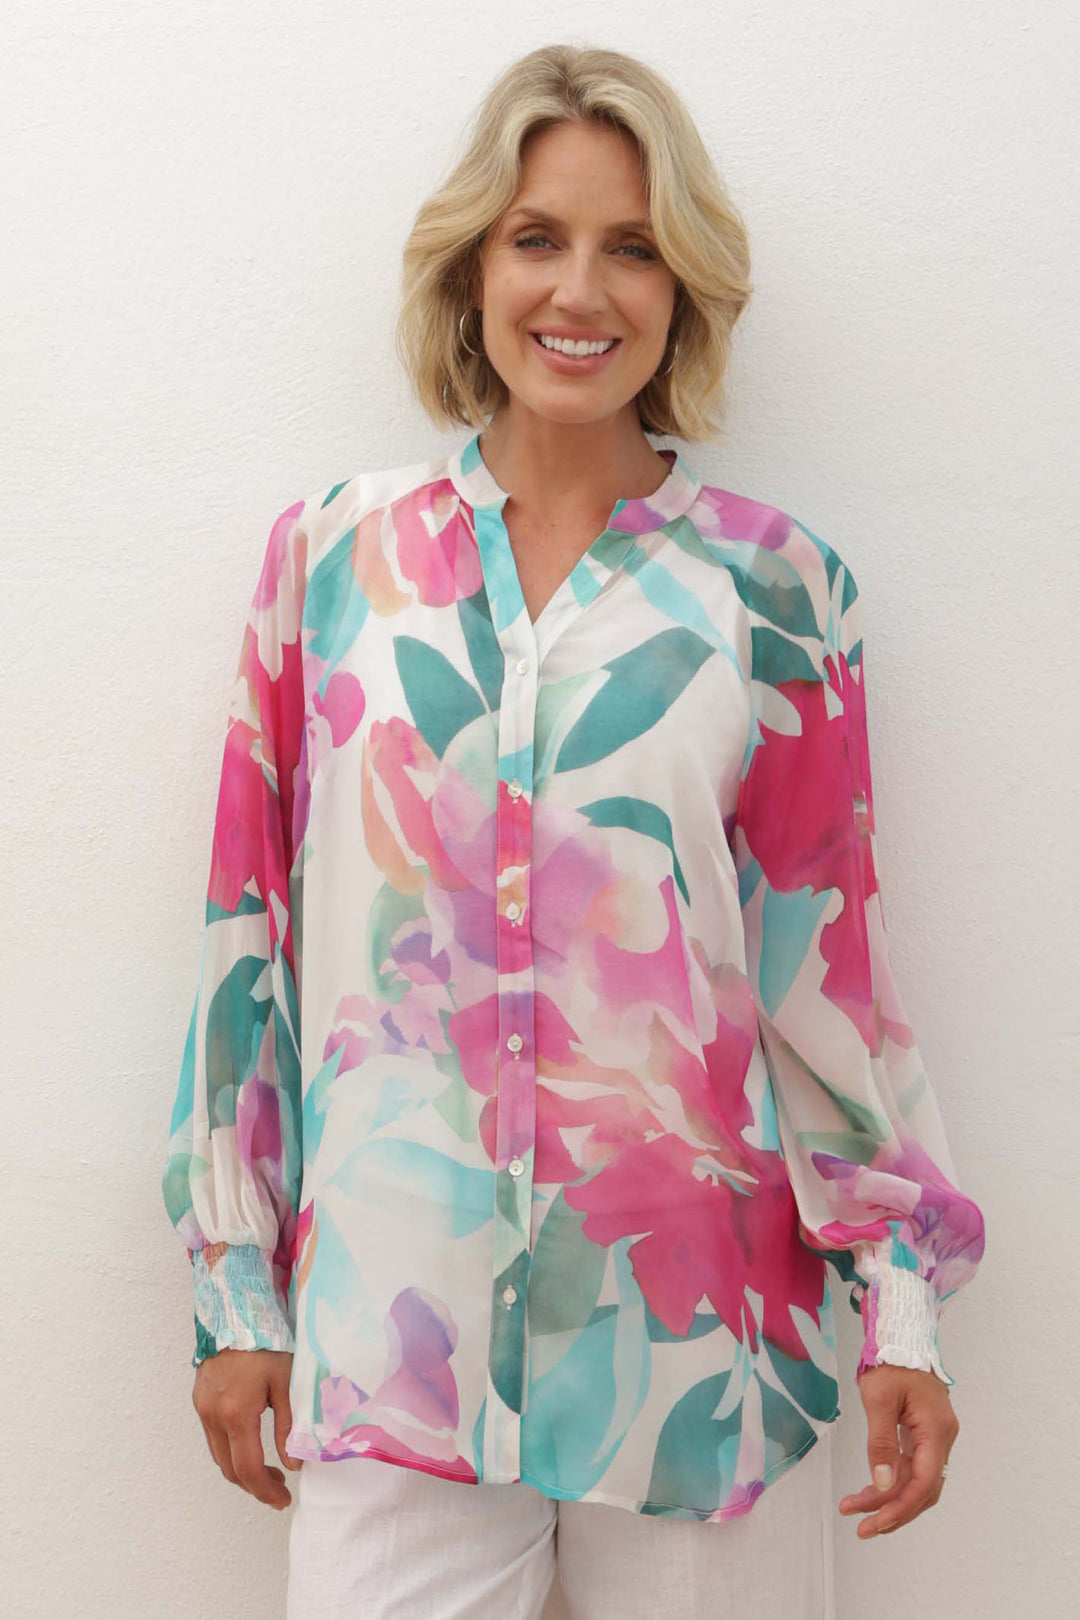 Pomodoro 12406 Orchid Pink Print Long Sleeved Blouse - Rouge Boutique Inverness